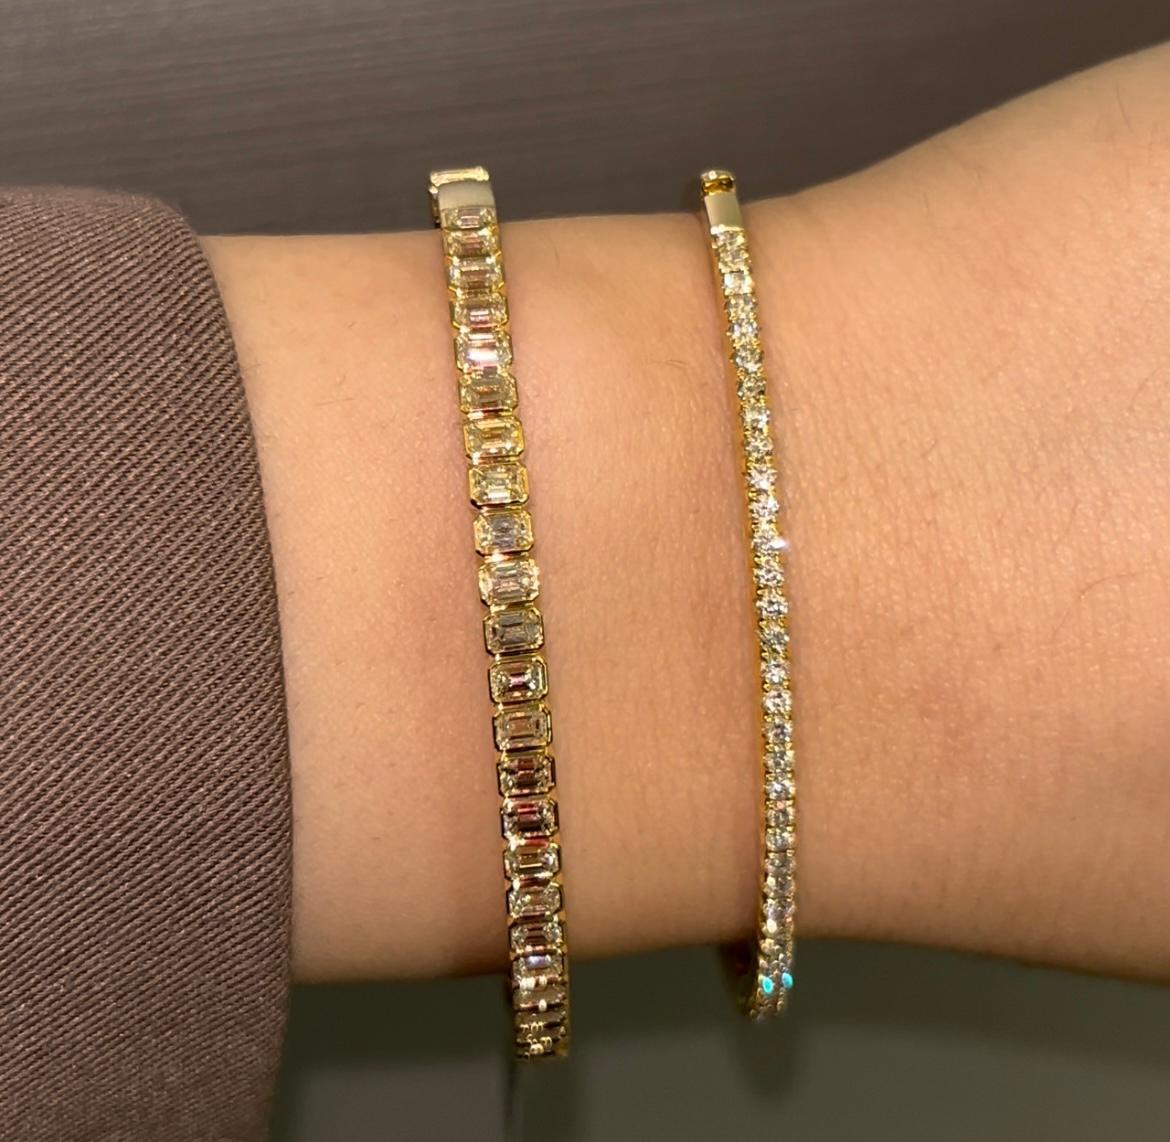 1.00 Carat Diamond Bangle Bracelet 18K Yellow Gold In New Condition For Sale In New York, NY